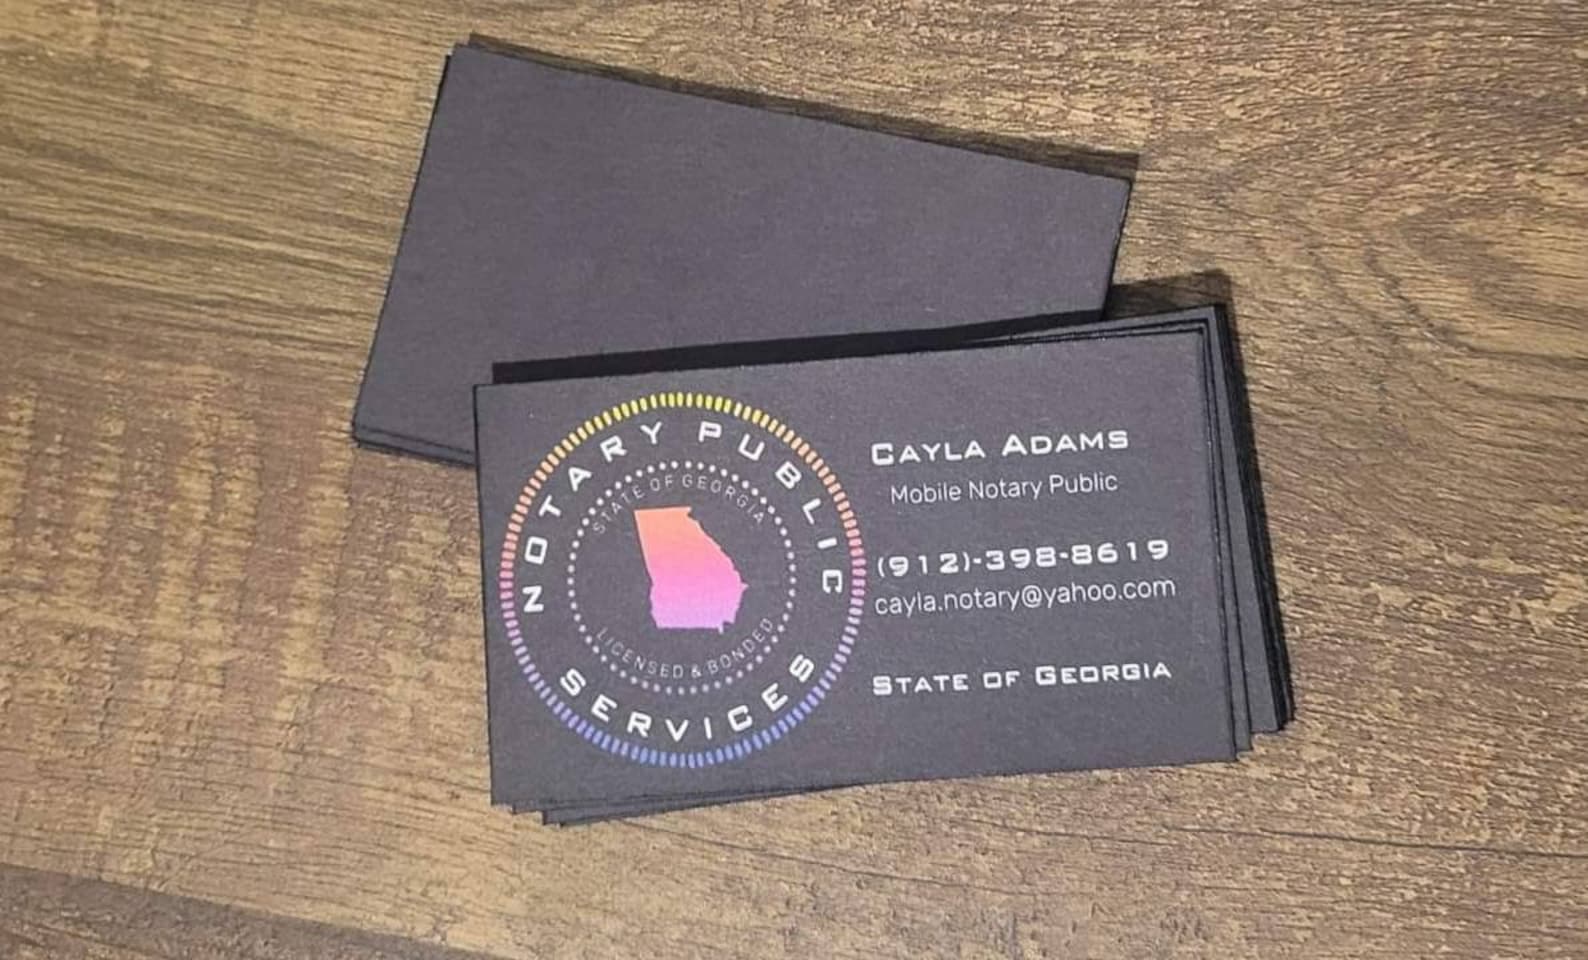 2 x 2 business cards 2